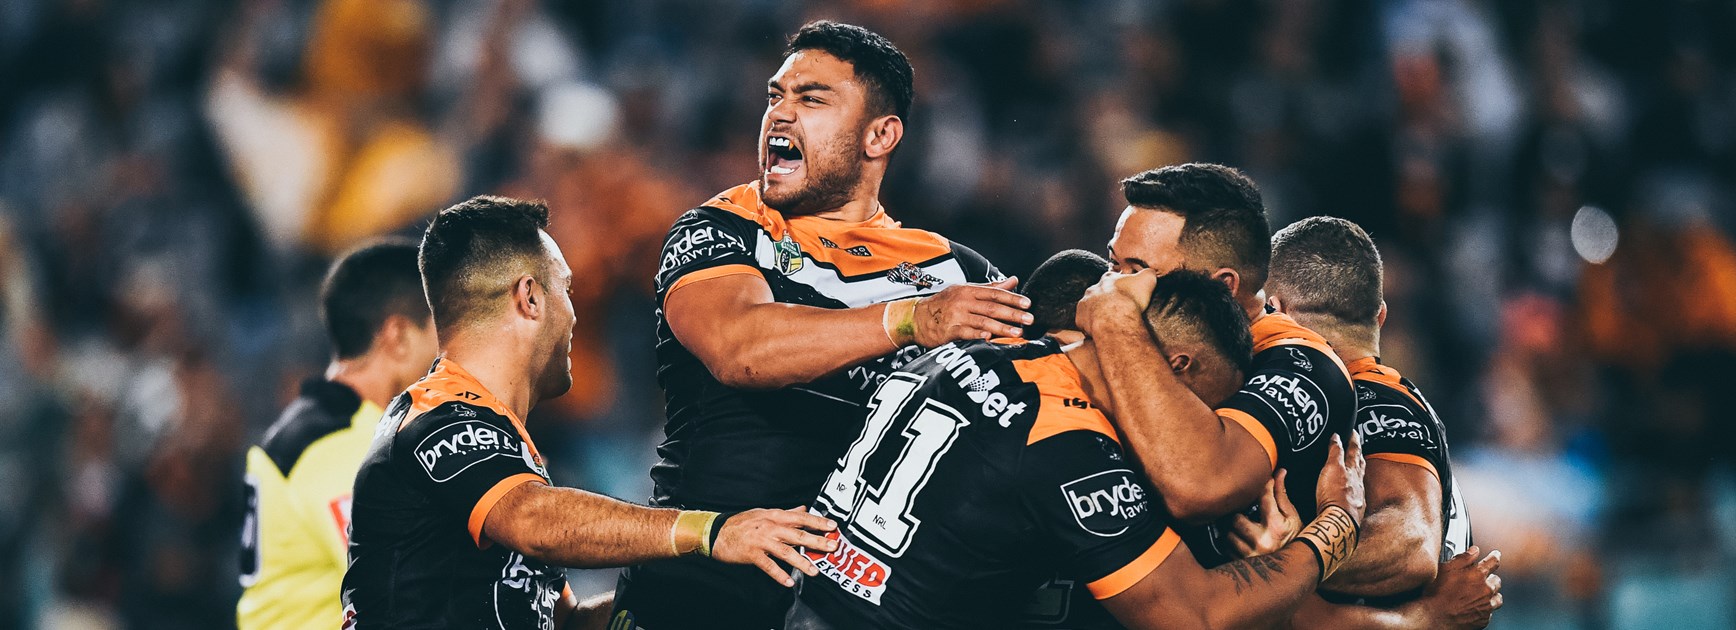 Wests Tigers set for Whangarei trial match